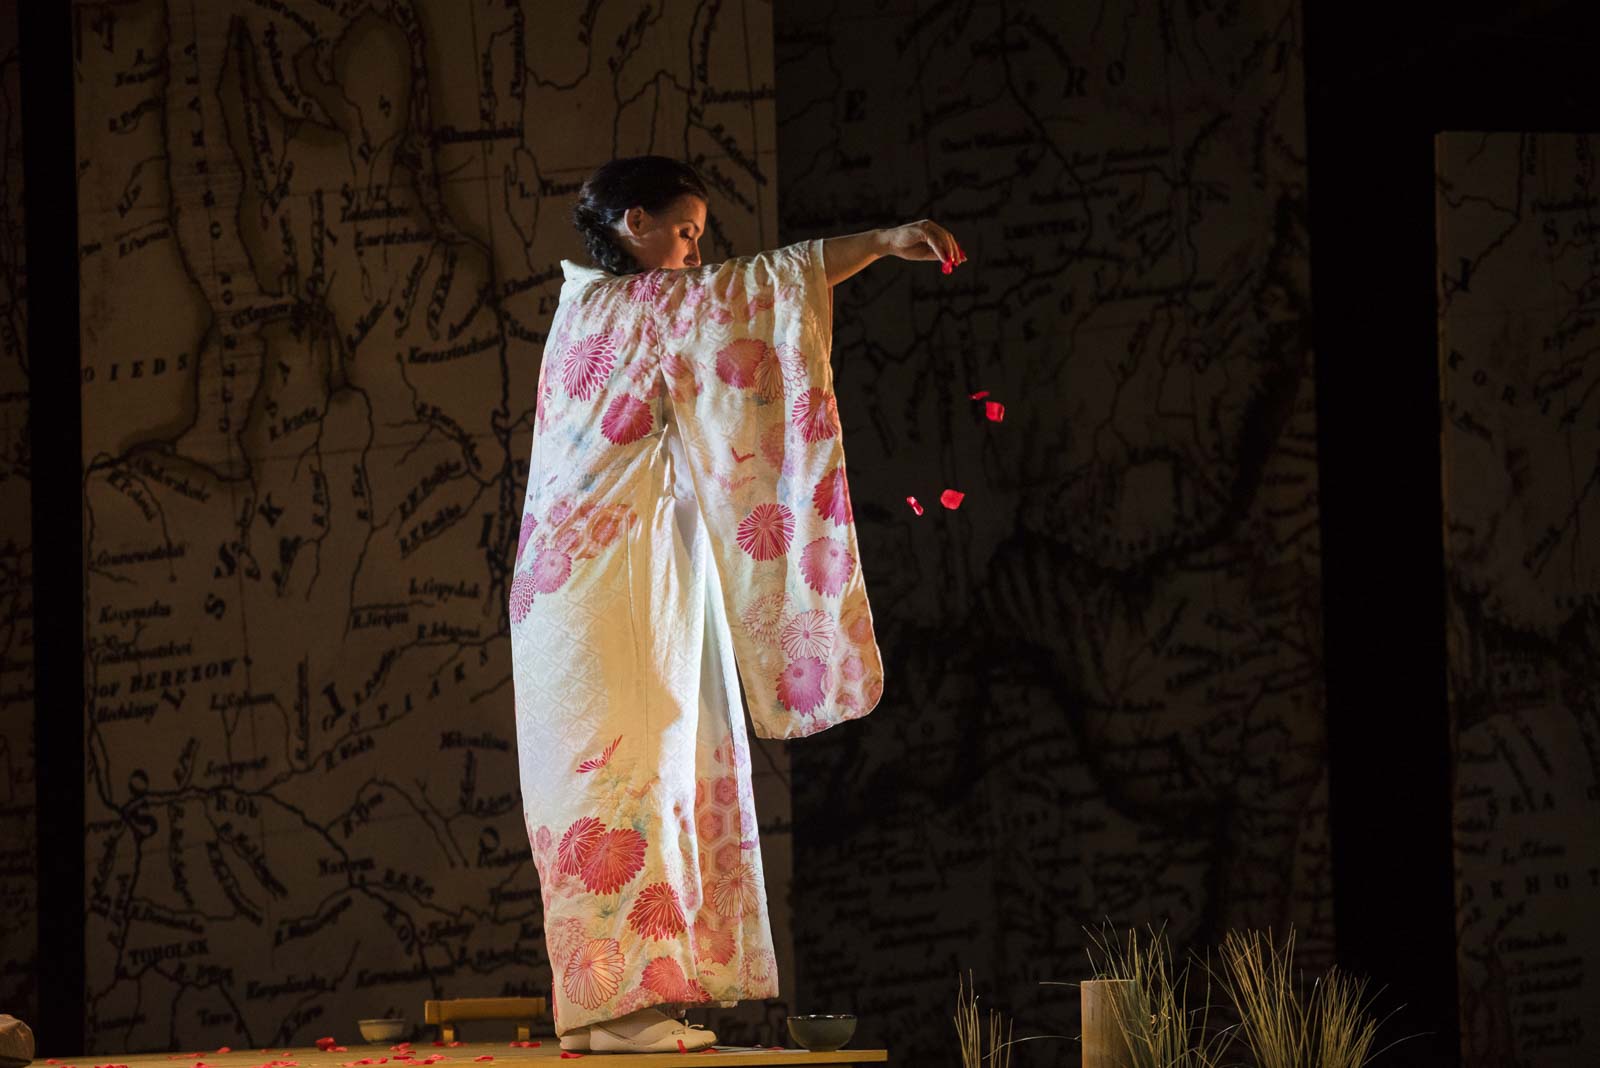 Madama Butterfly scattering rose petals